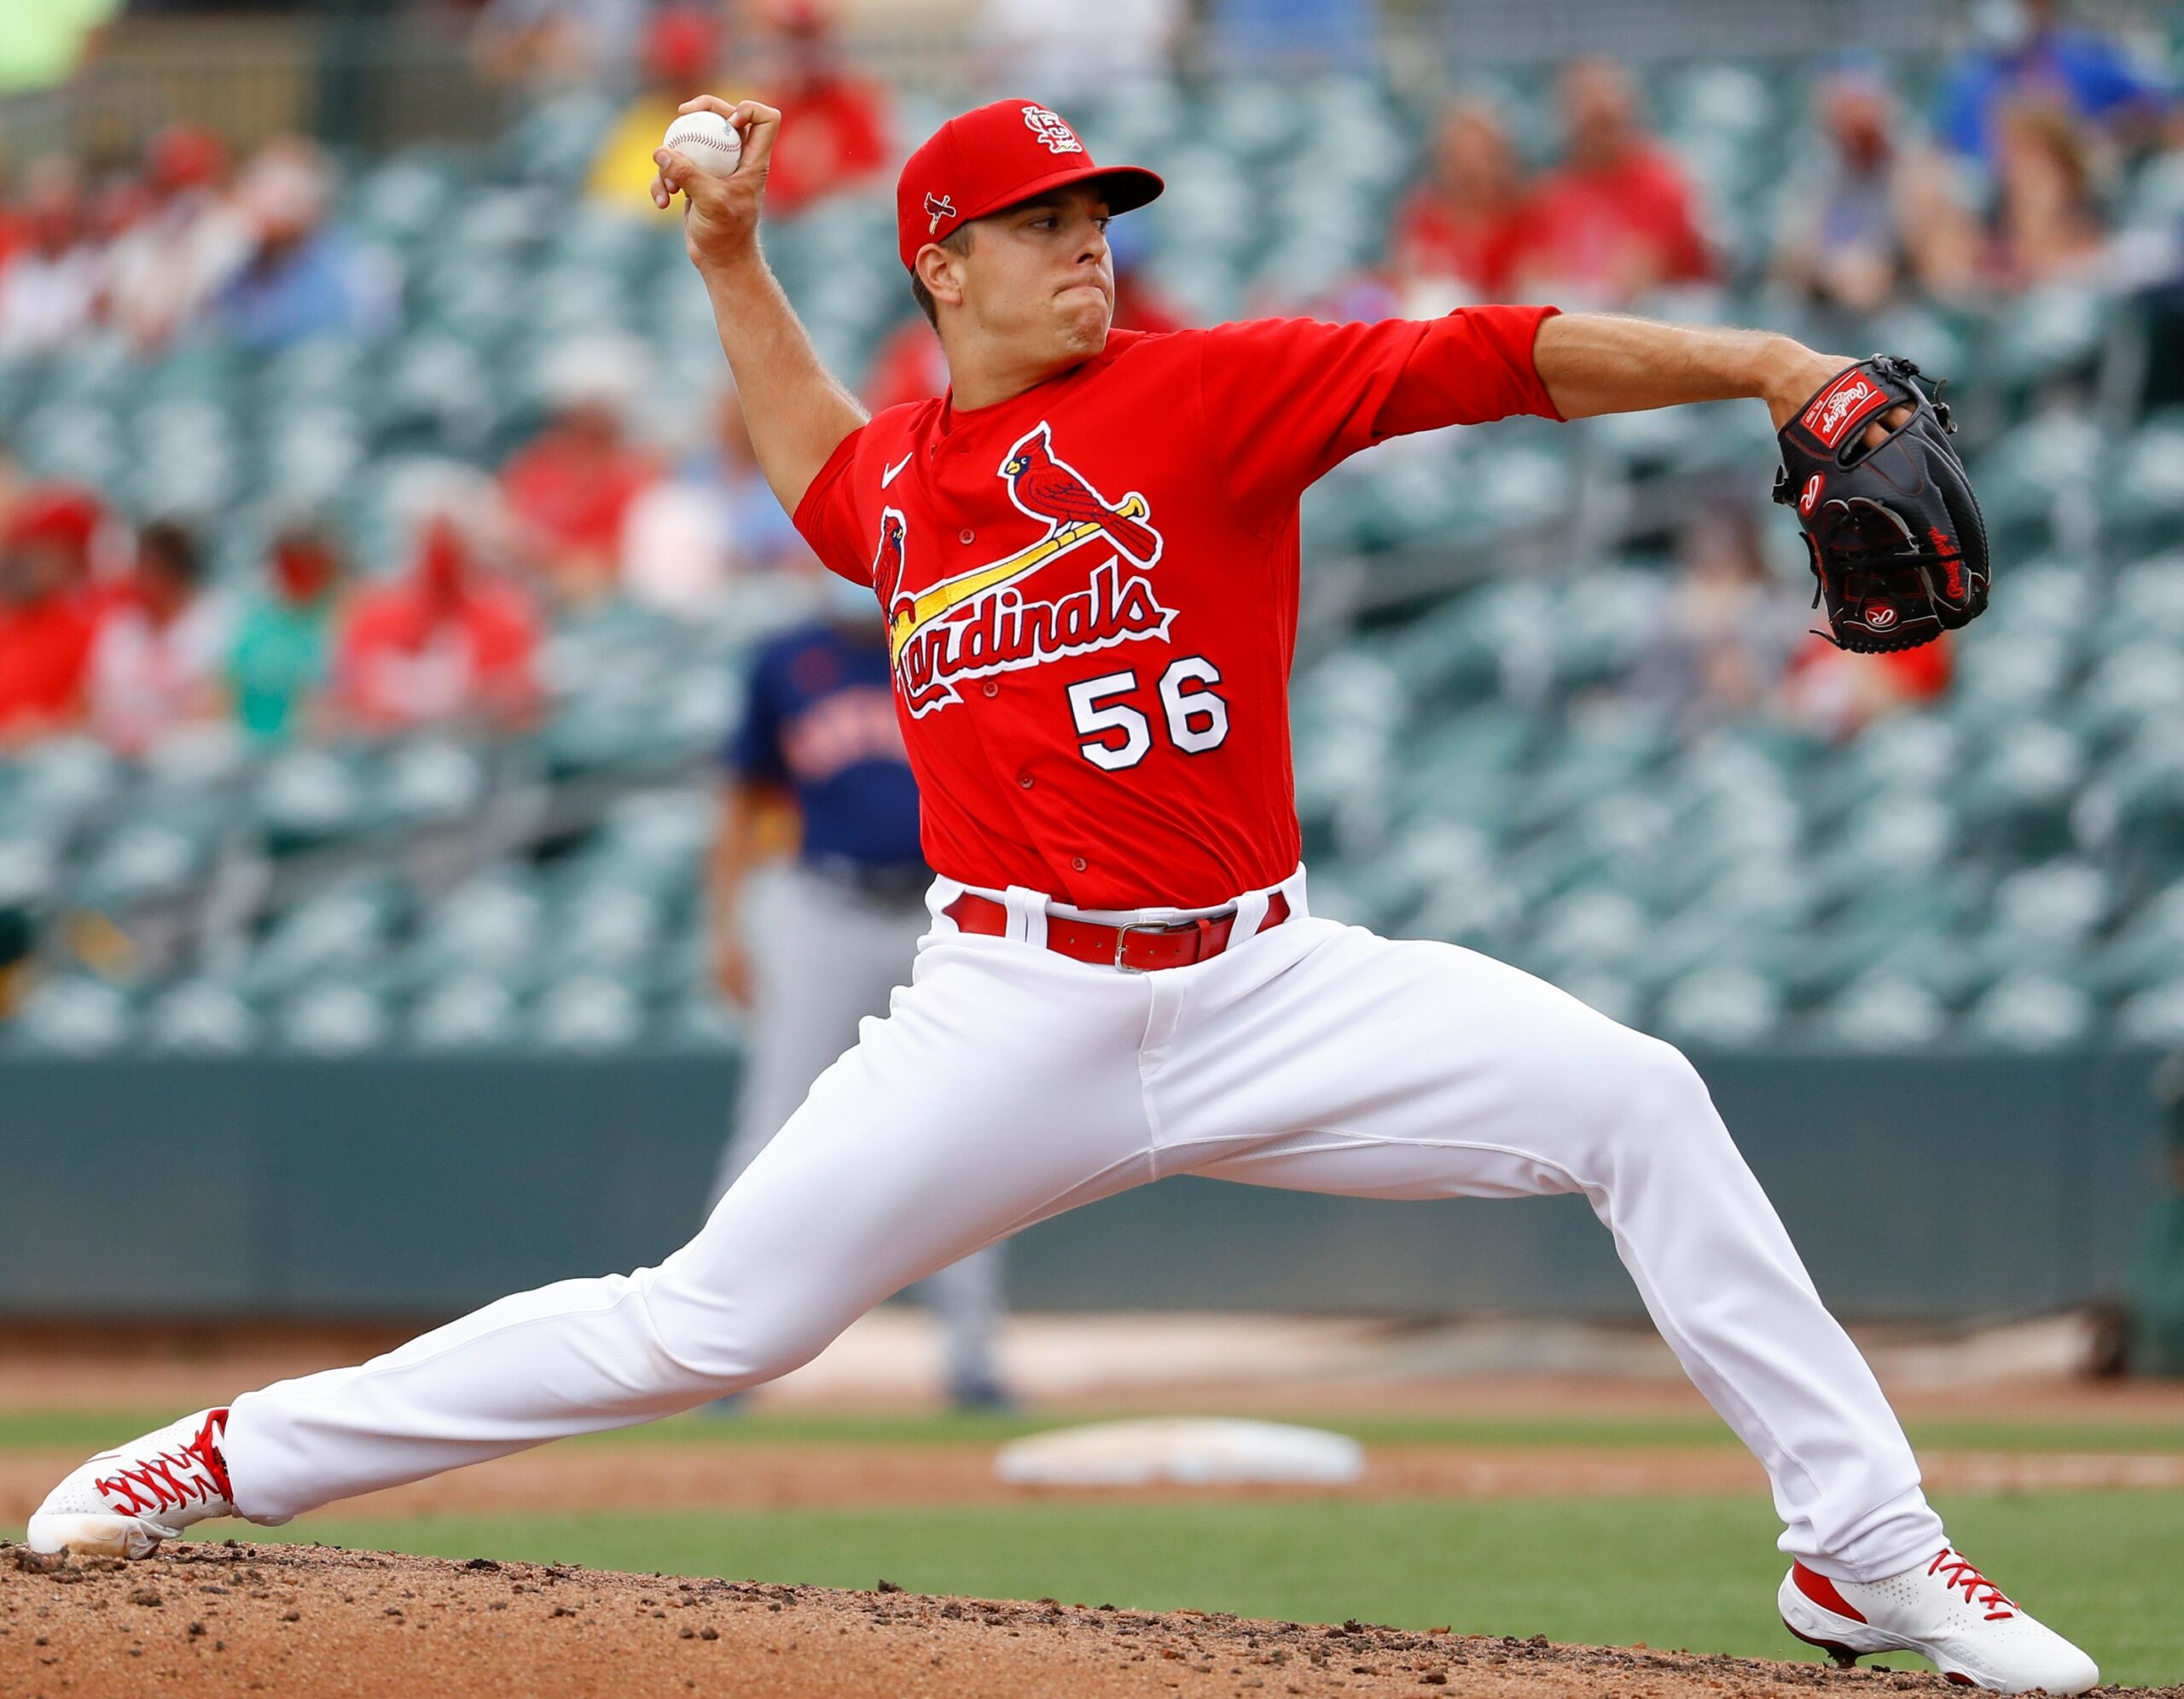 Tahlequah native and Cherokee Nation Citizen Ryan Helsley of the St. Louis Cardinals is one of baseball's top closers.(Credit: Billy Hurst/St. Louis Cardinals).